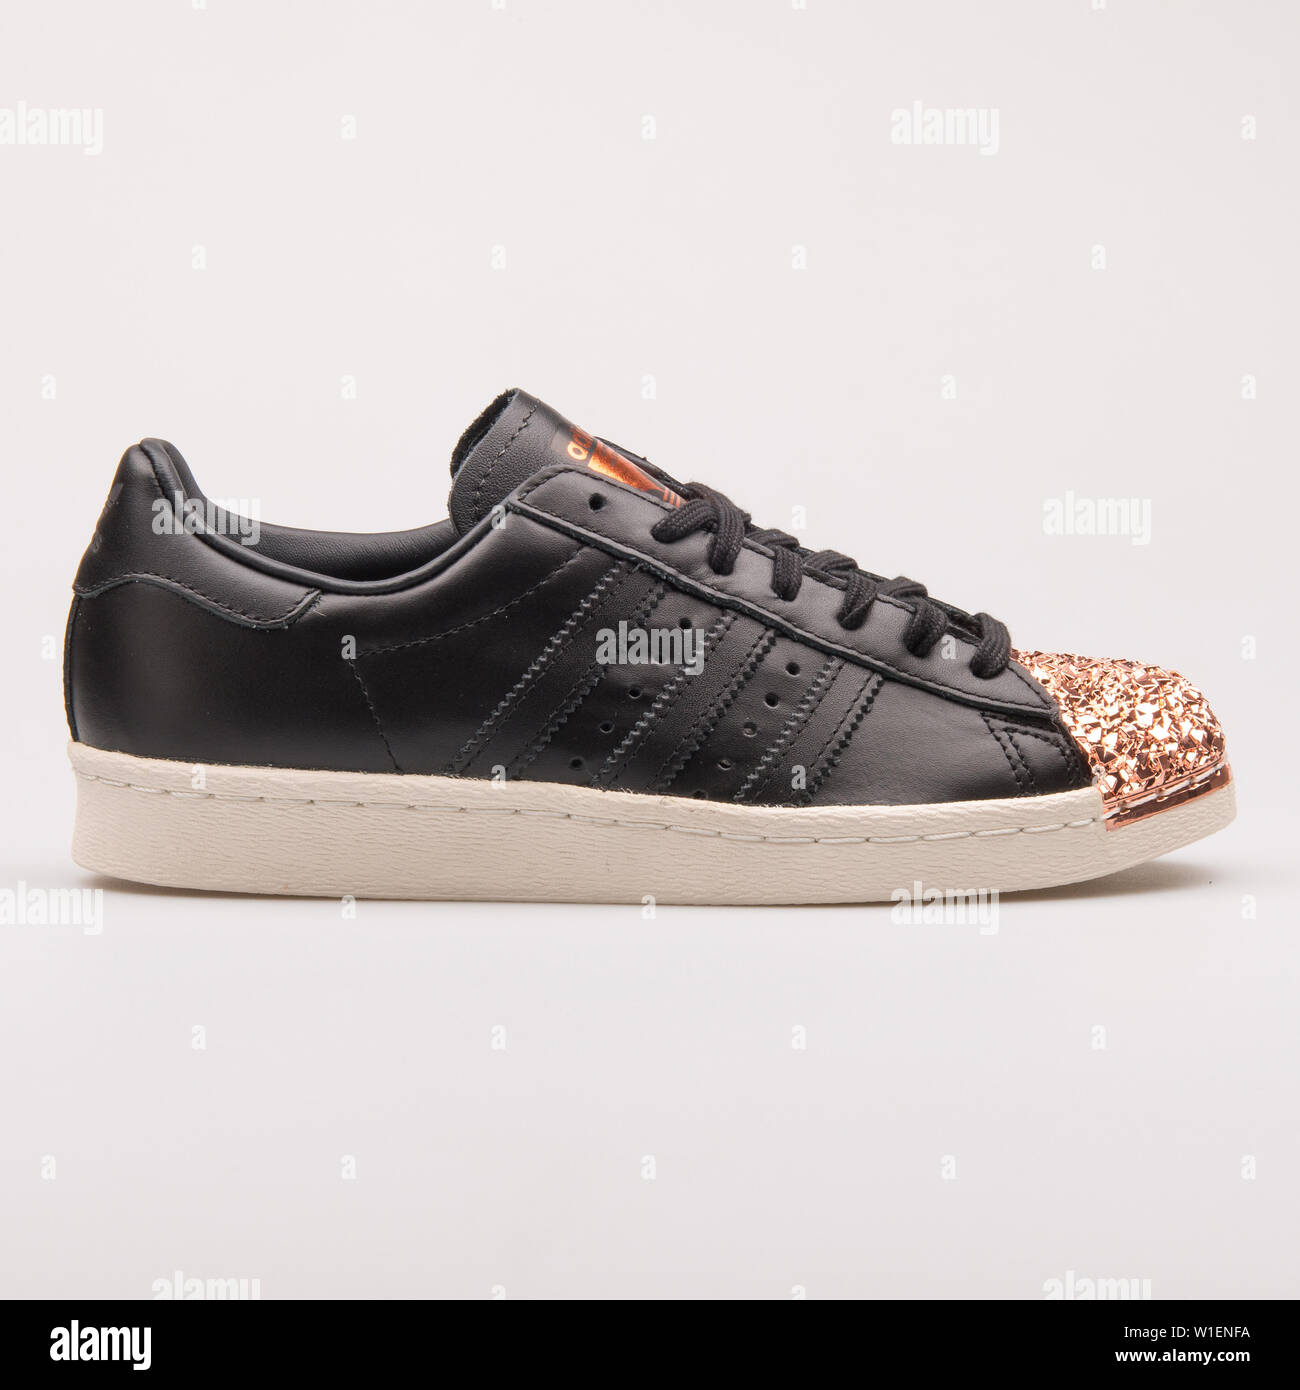 VIENNA, AUSTRIA - AUGUST 30, 2017: Adidas Superstar 80s Metal Toe black and  copper sneaker on white background Stock Photo - Alamy